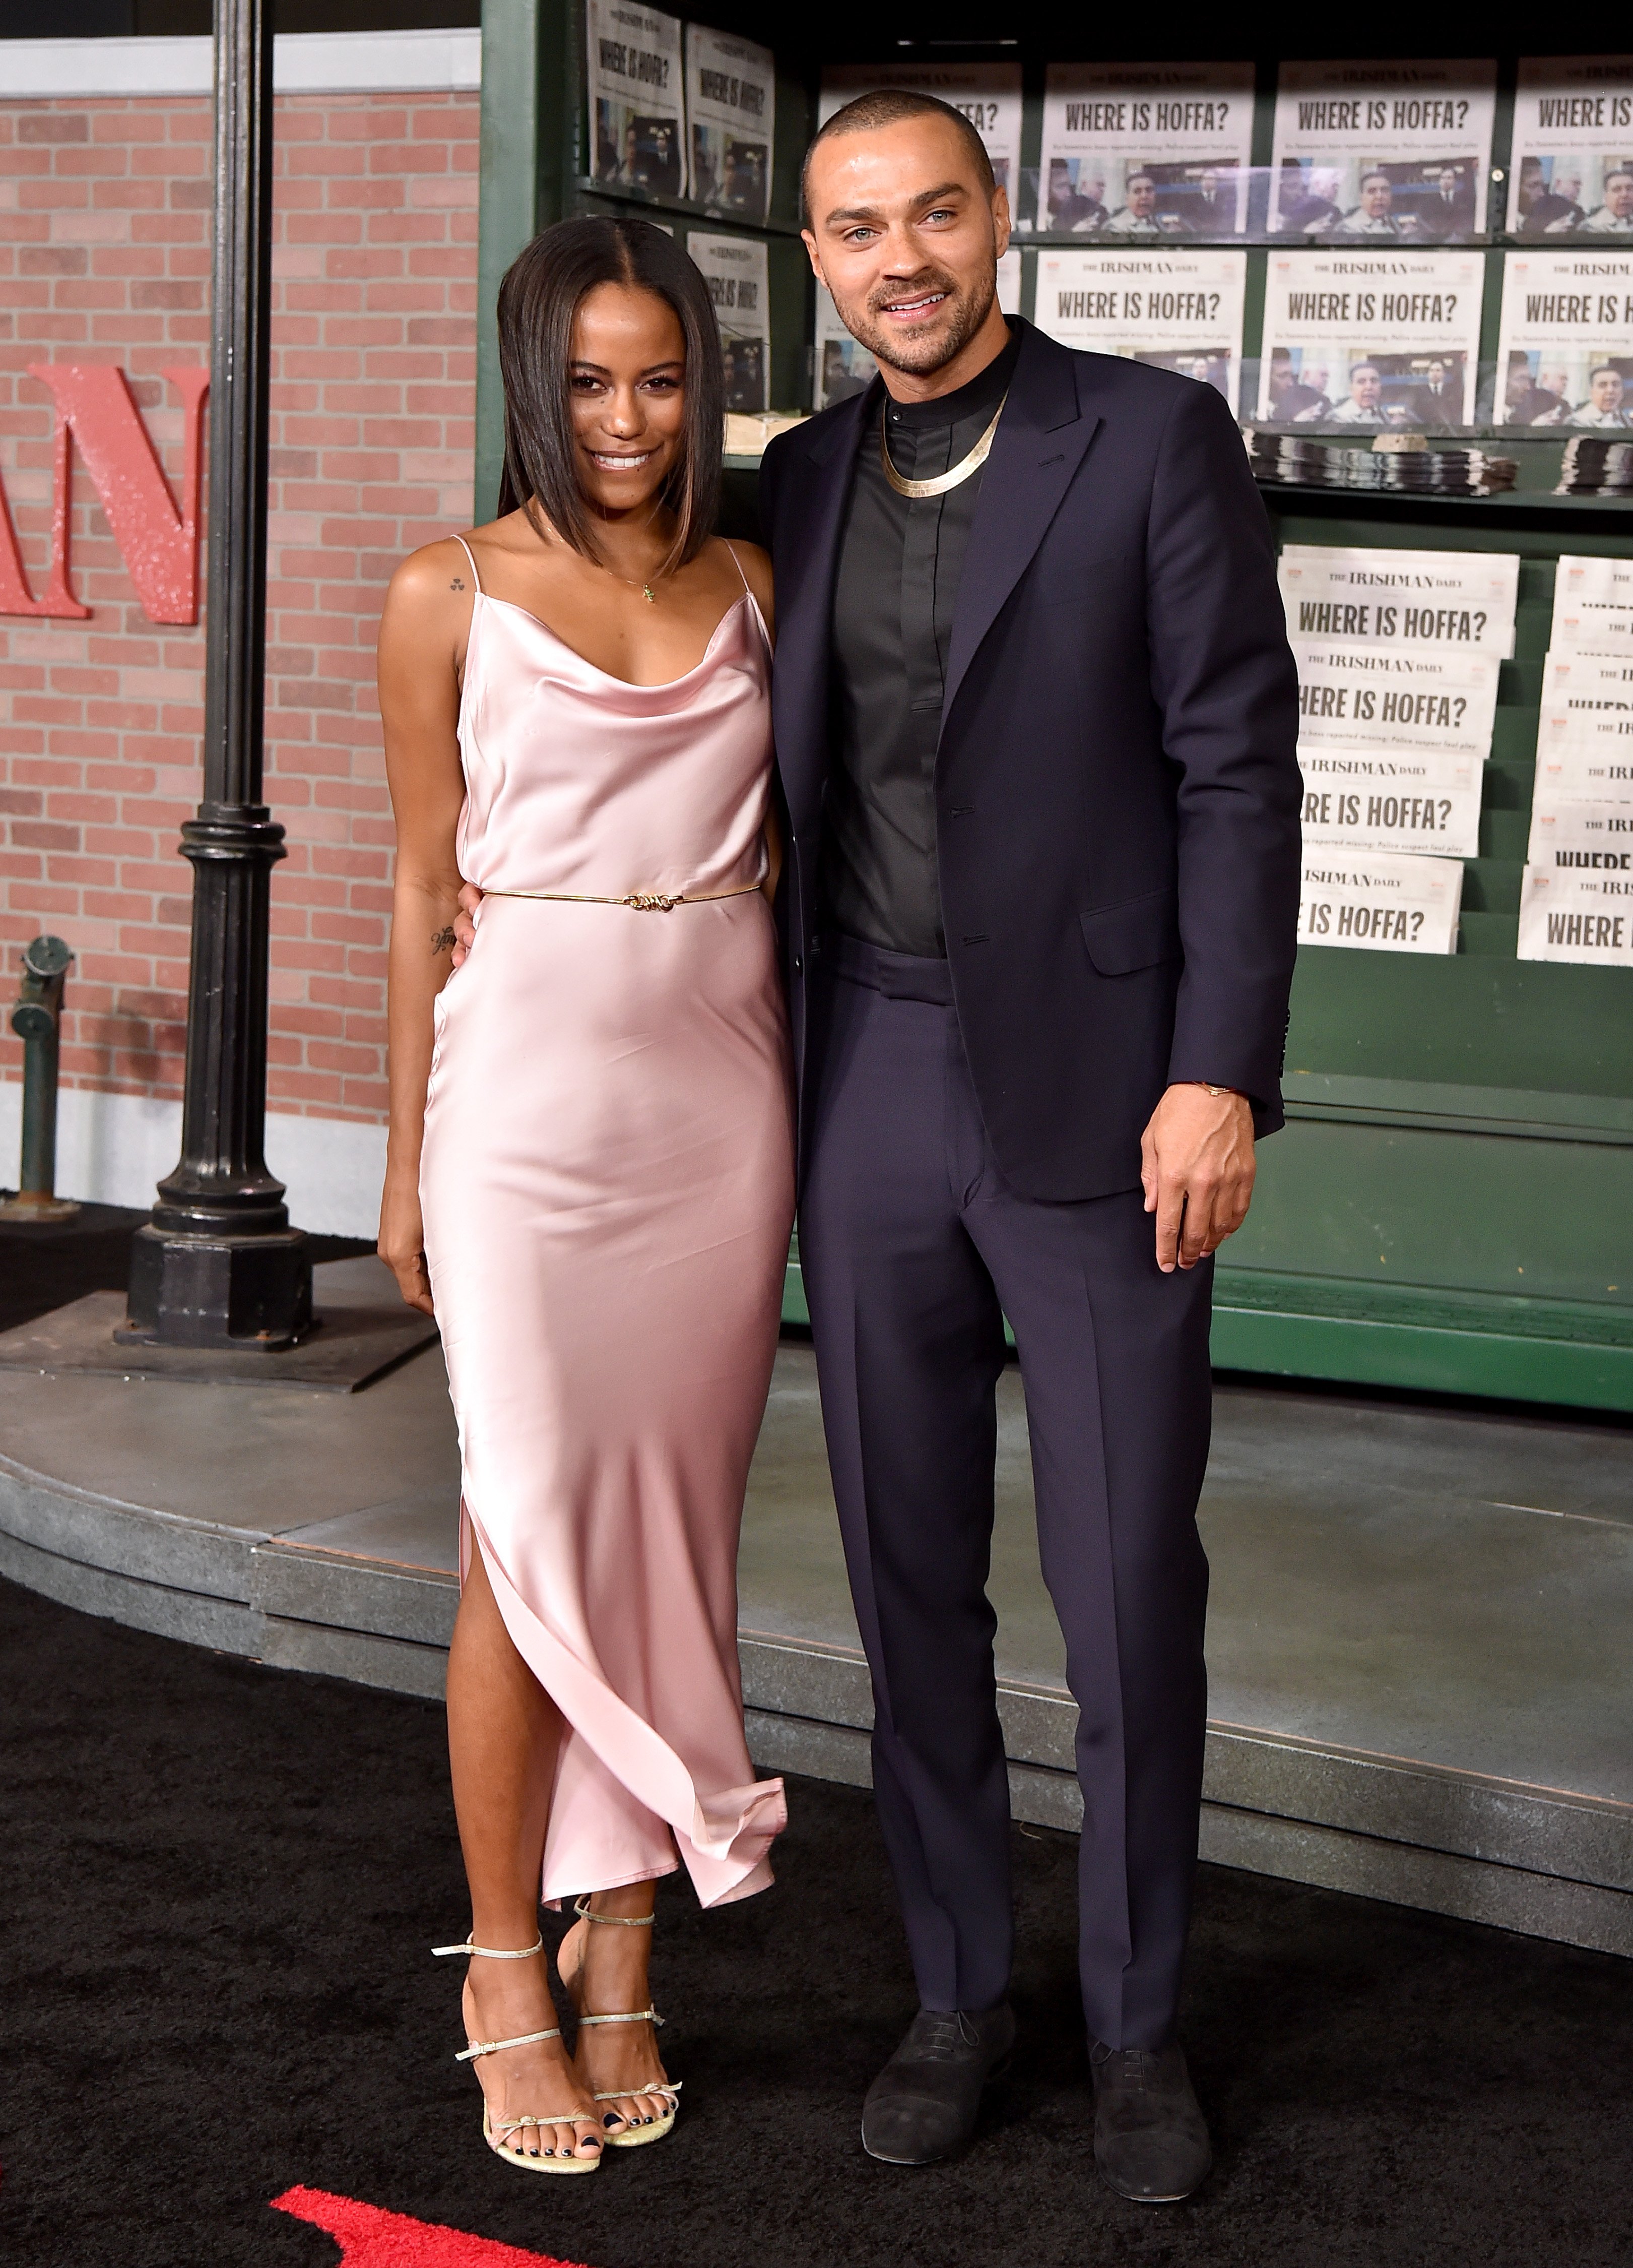 Jesse Williams and Taylour Paige at the Premiere of Netflix's "The Irishman" on October 24, 2019 in Hollywood, California. | Source: Getty images